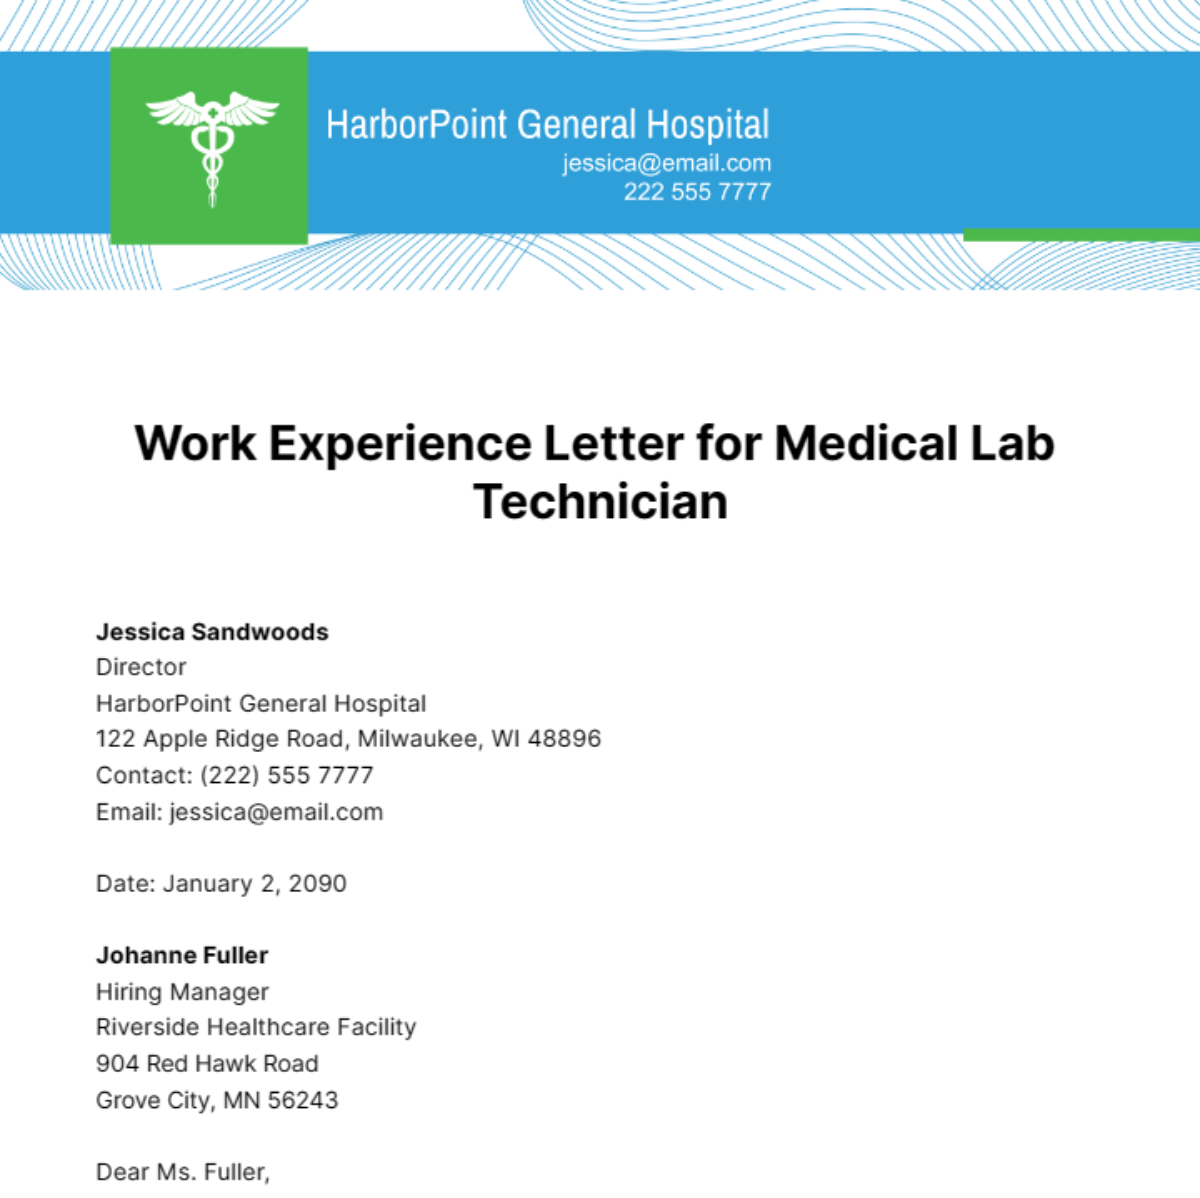 Work Experience Letter for Medical Lab Technician Template